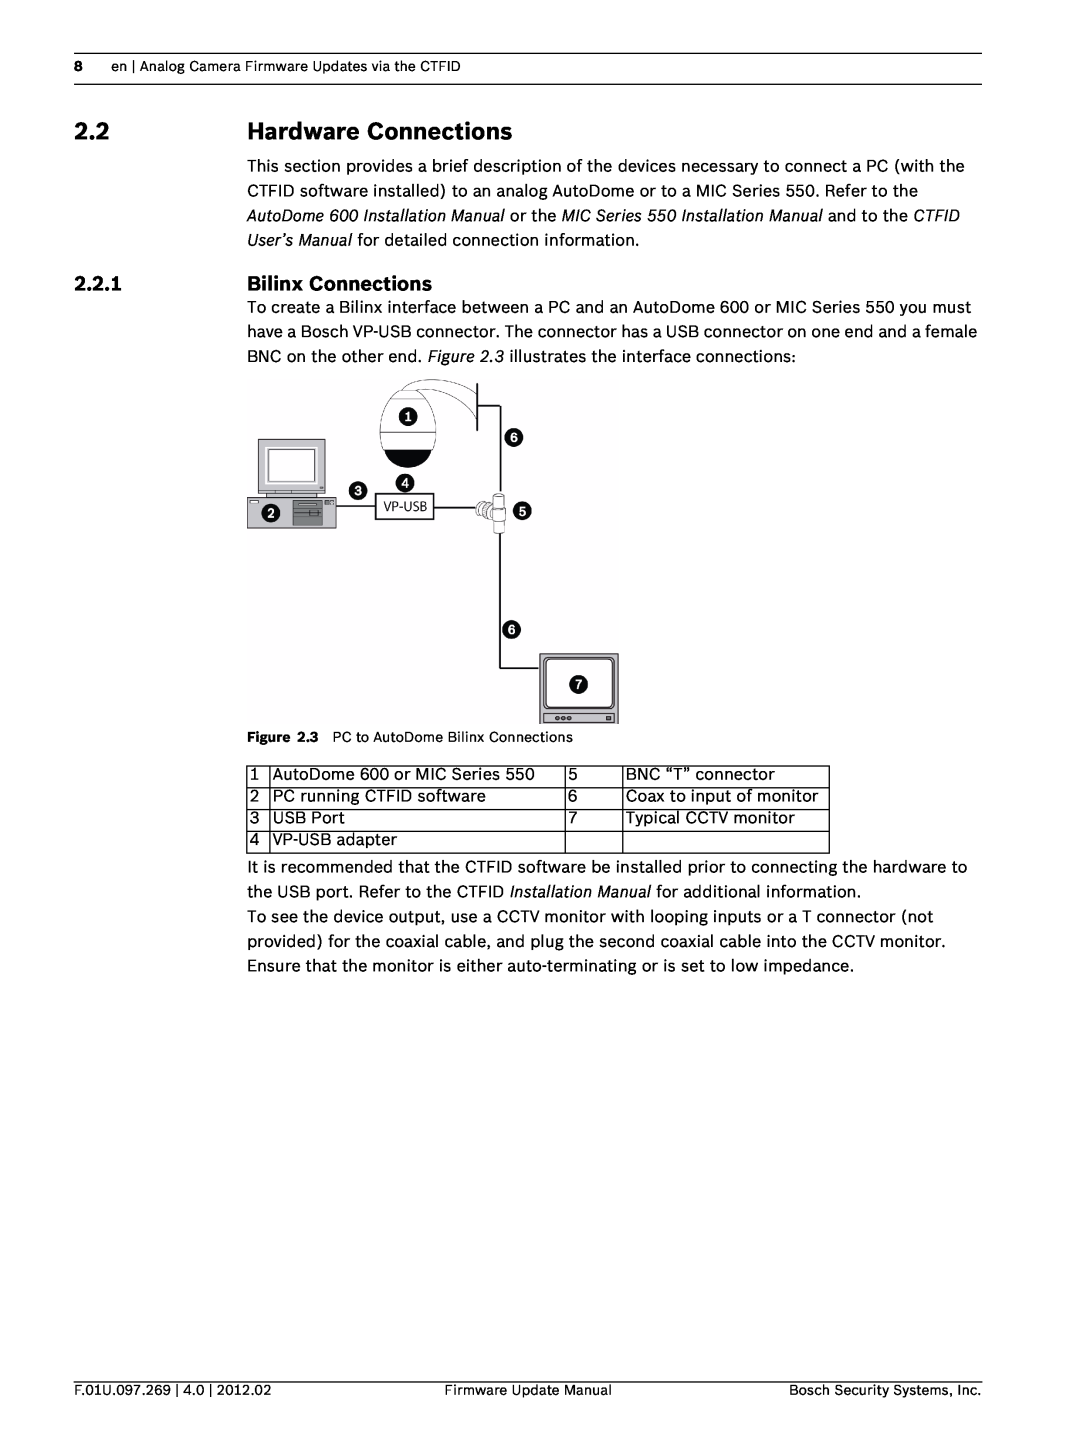 Bosch Appliances 800, 100, 700, 600 user manual Hardware Connections, 2.2.1, Bilinx Connections 